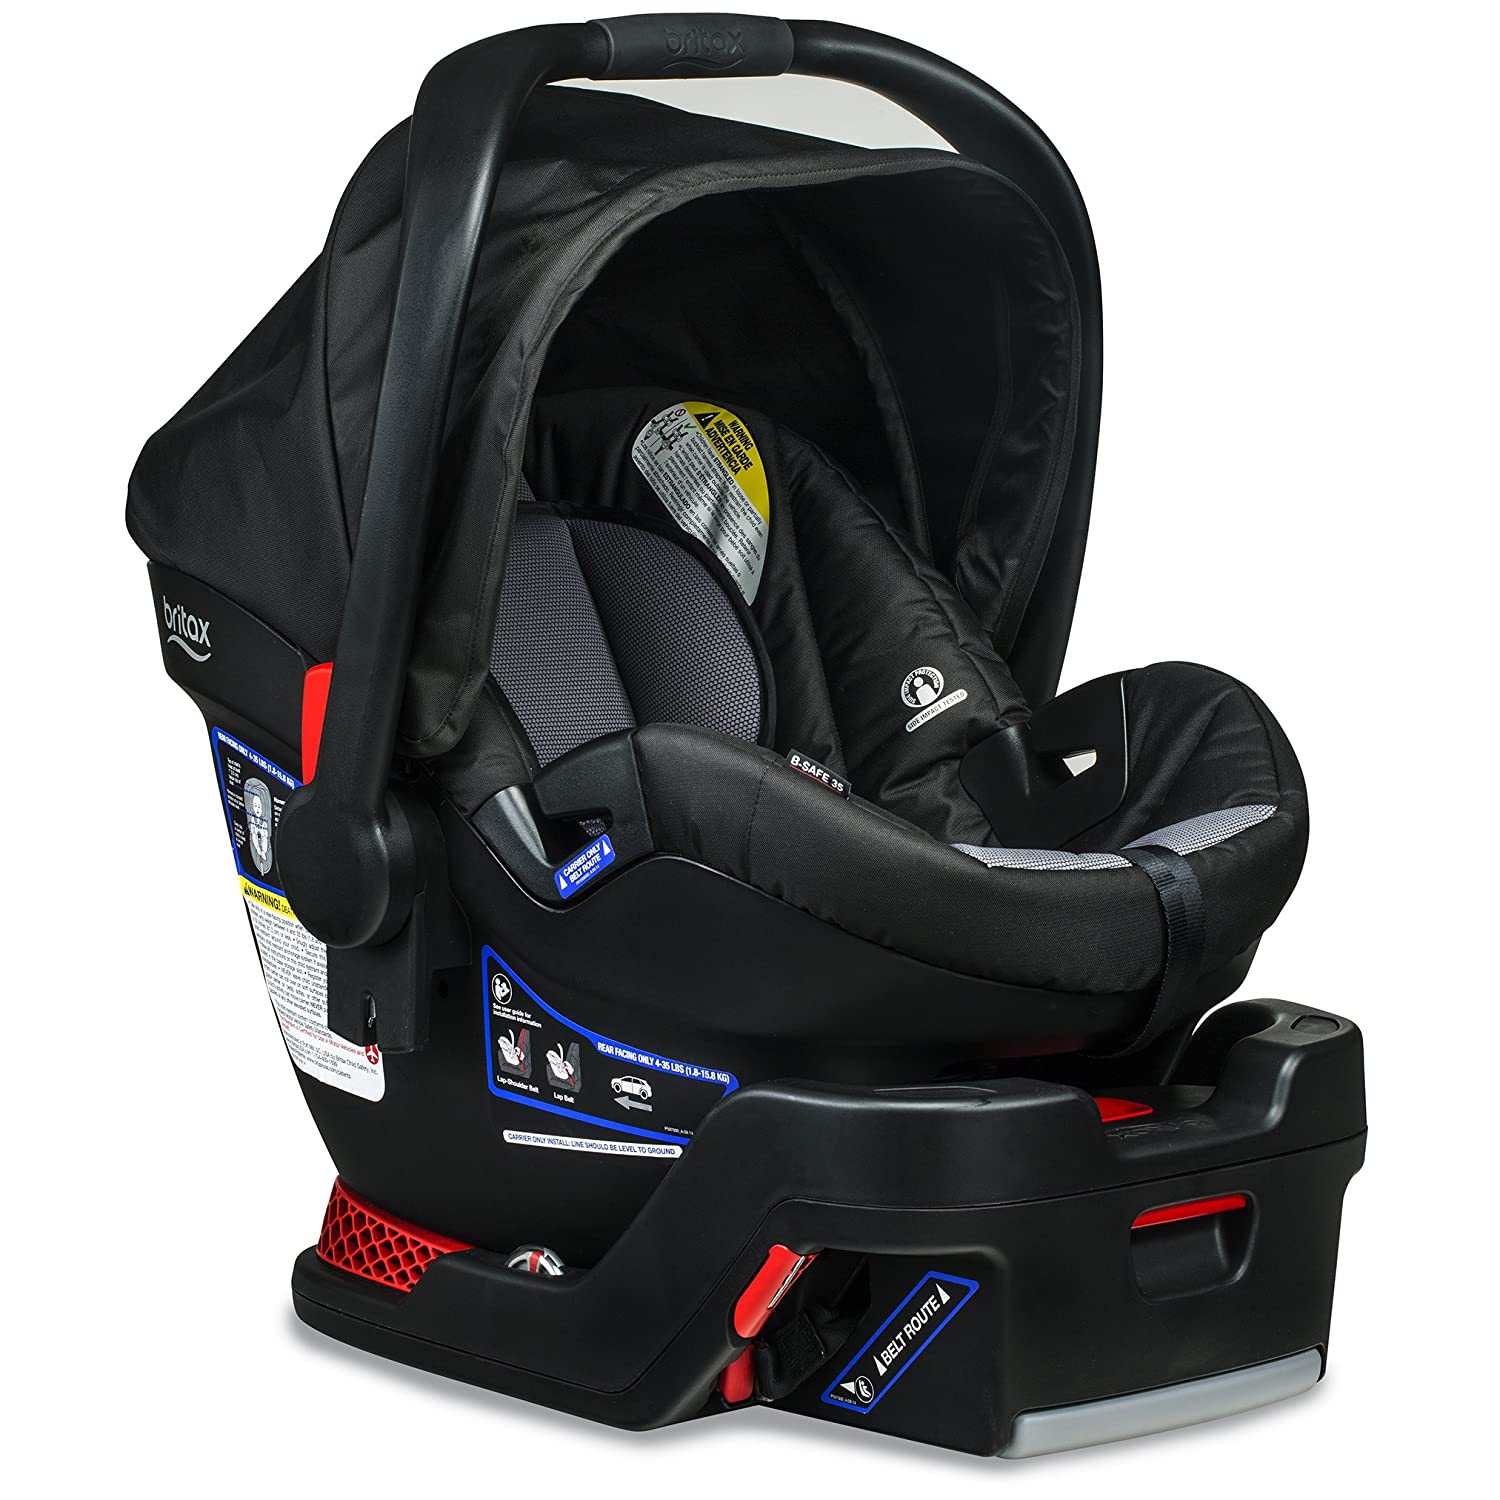 The Best Infant Car Seat December 2021 - What Is The Safest Infant Car Seat 2021